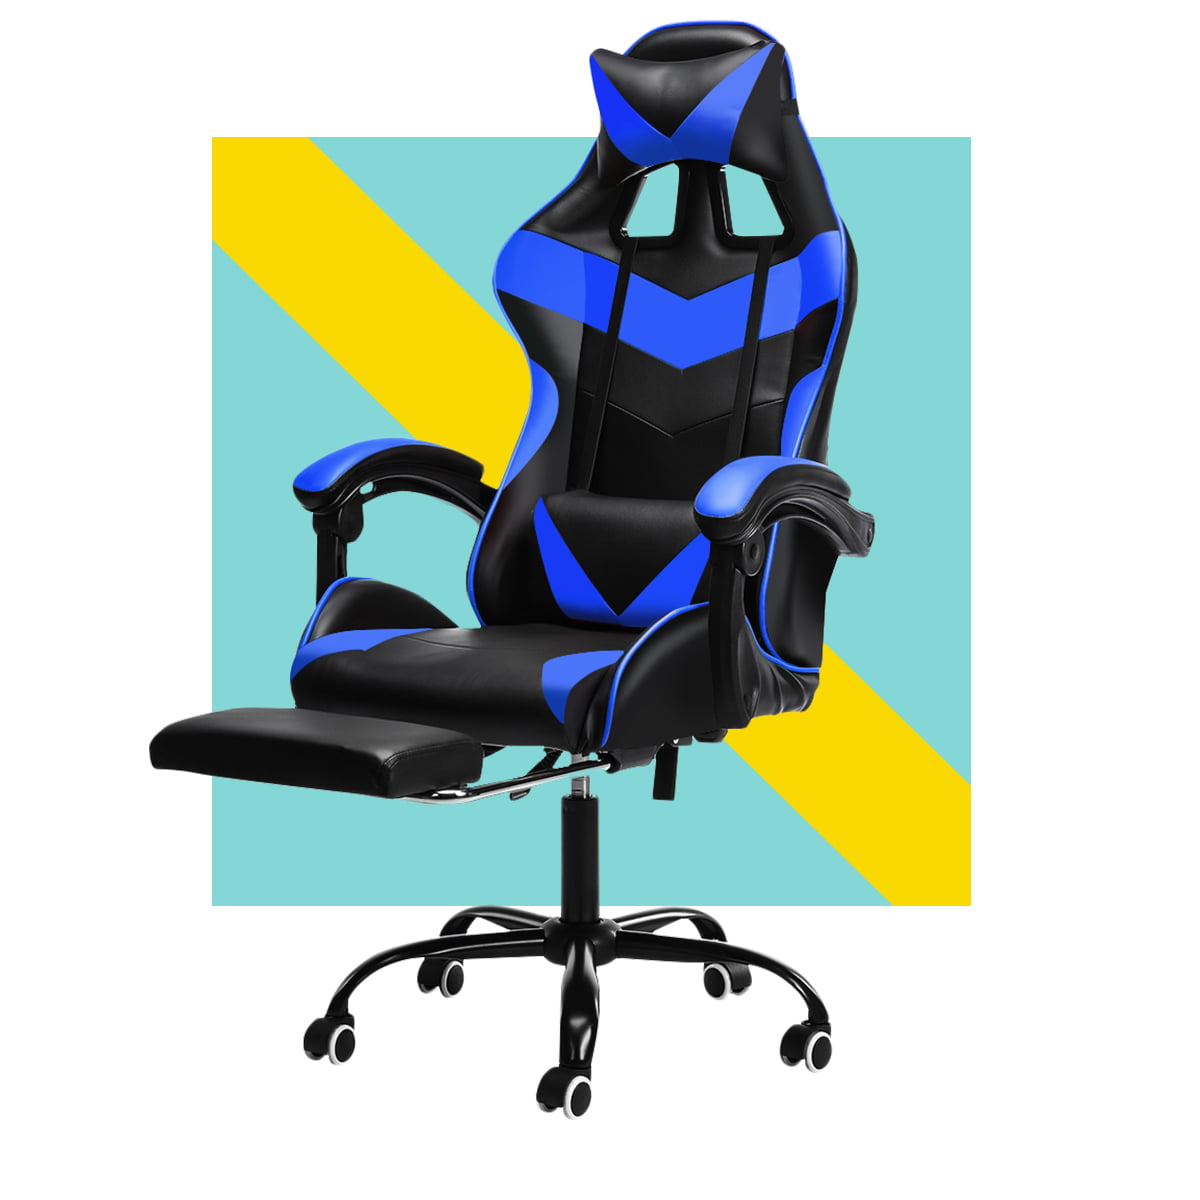 White Bigacc E-Sports PC Gaming Chair Home Office Chair Ergonomic Computer Massage Chair PU Leather Desk Chair with Headrest Lumbar Support Thick Armrest Foot Rest Task Rolling Swivel Chair for Men 